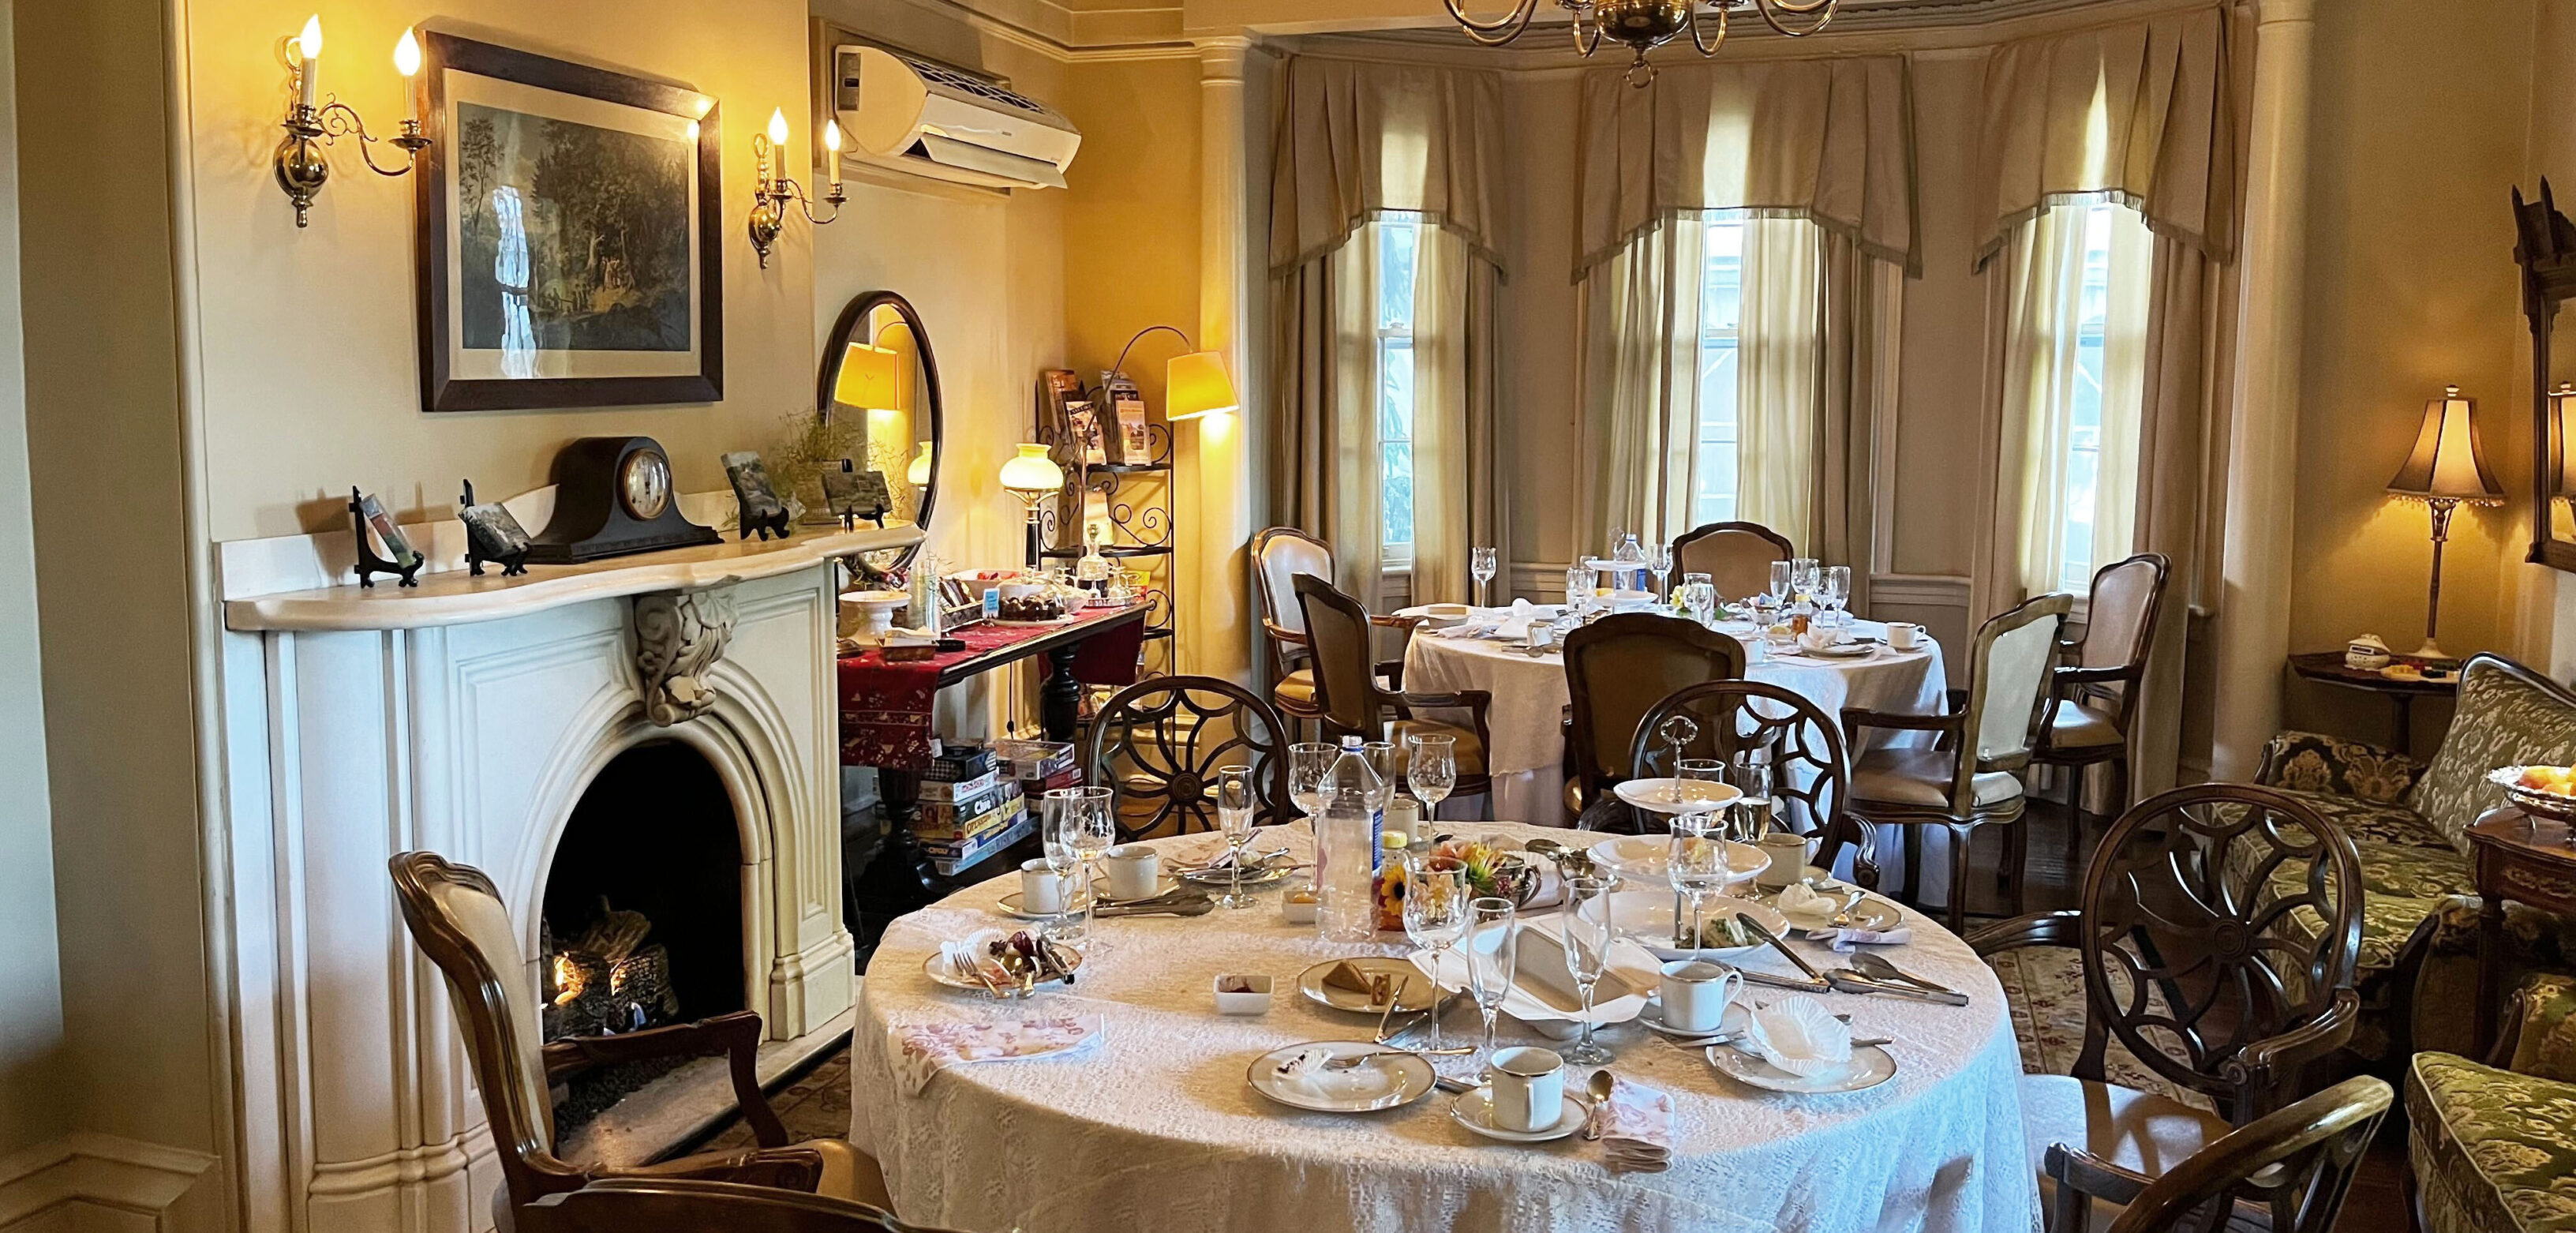 History meets hospitality at Sayre Mansion - The Brown and White